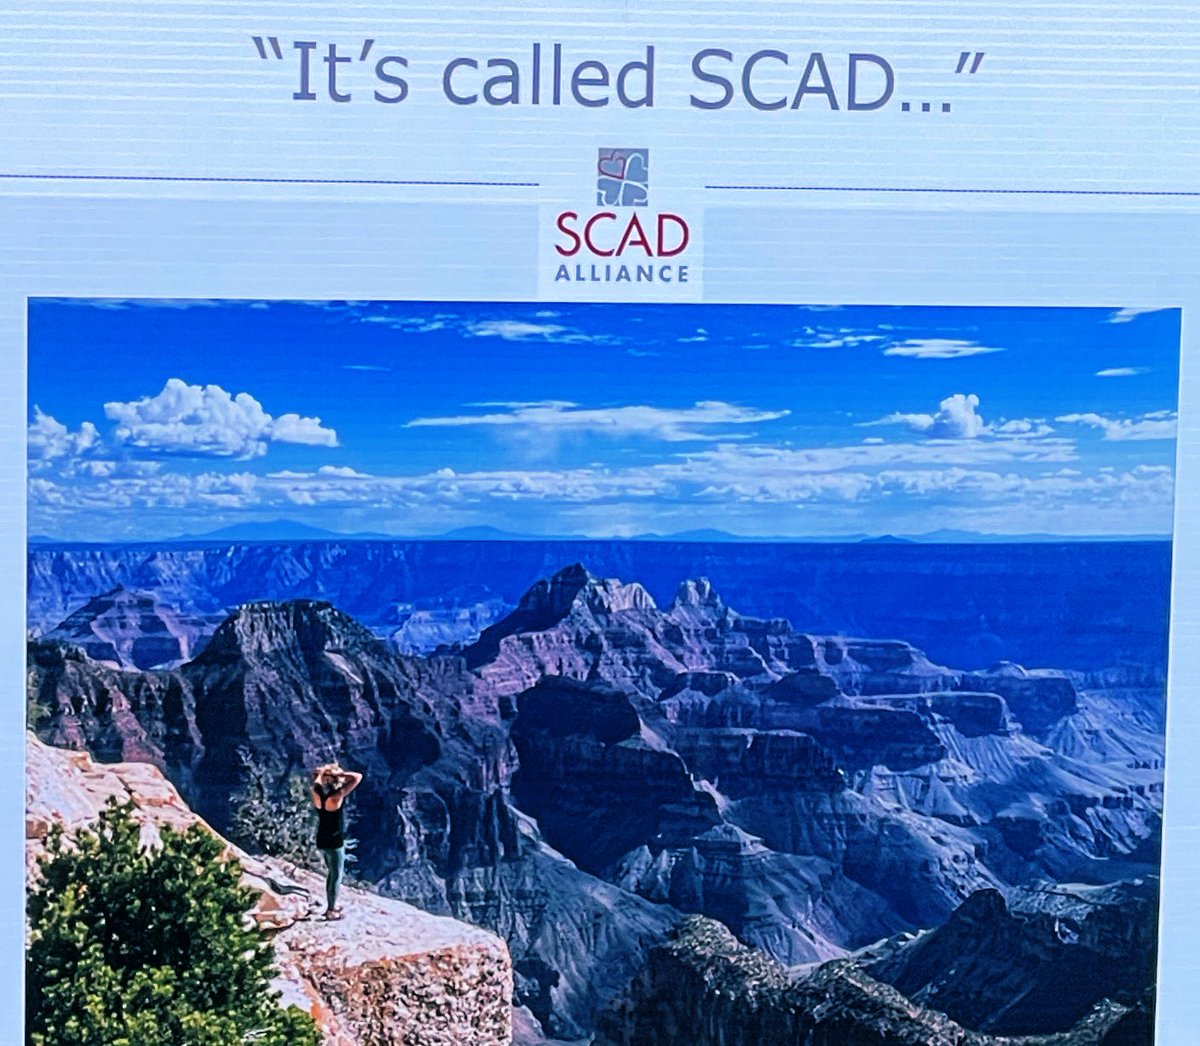 Amazing SCAD conference today! Thanks @EstherSHKimMD @SCADalliance and the Izard family @kathyizardclt for bringing physicians, scientists and patients together to help move forward our understanding of this important disease! #SCAD